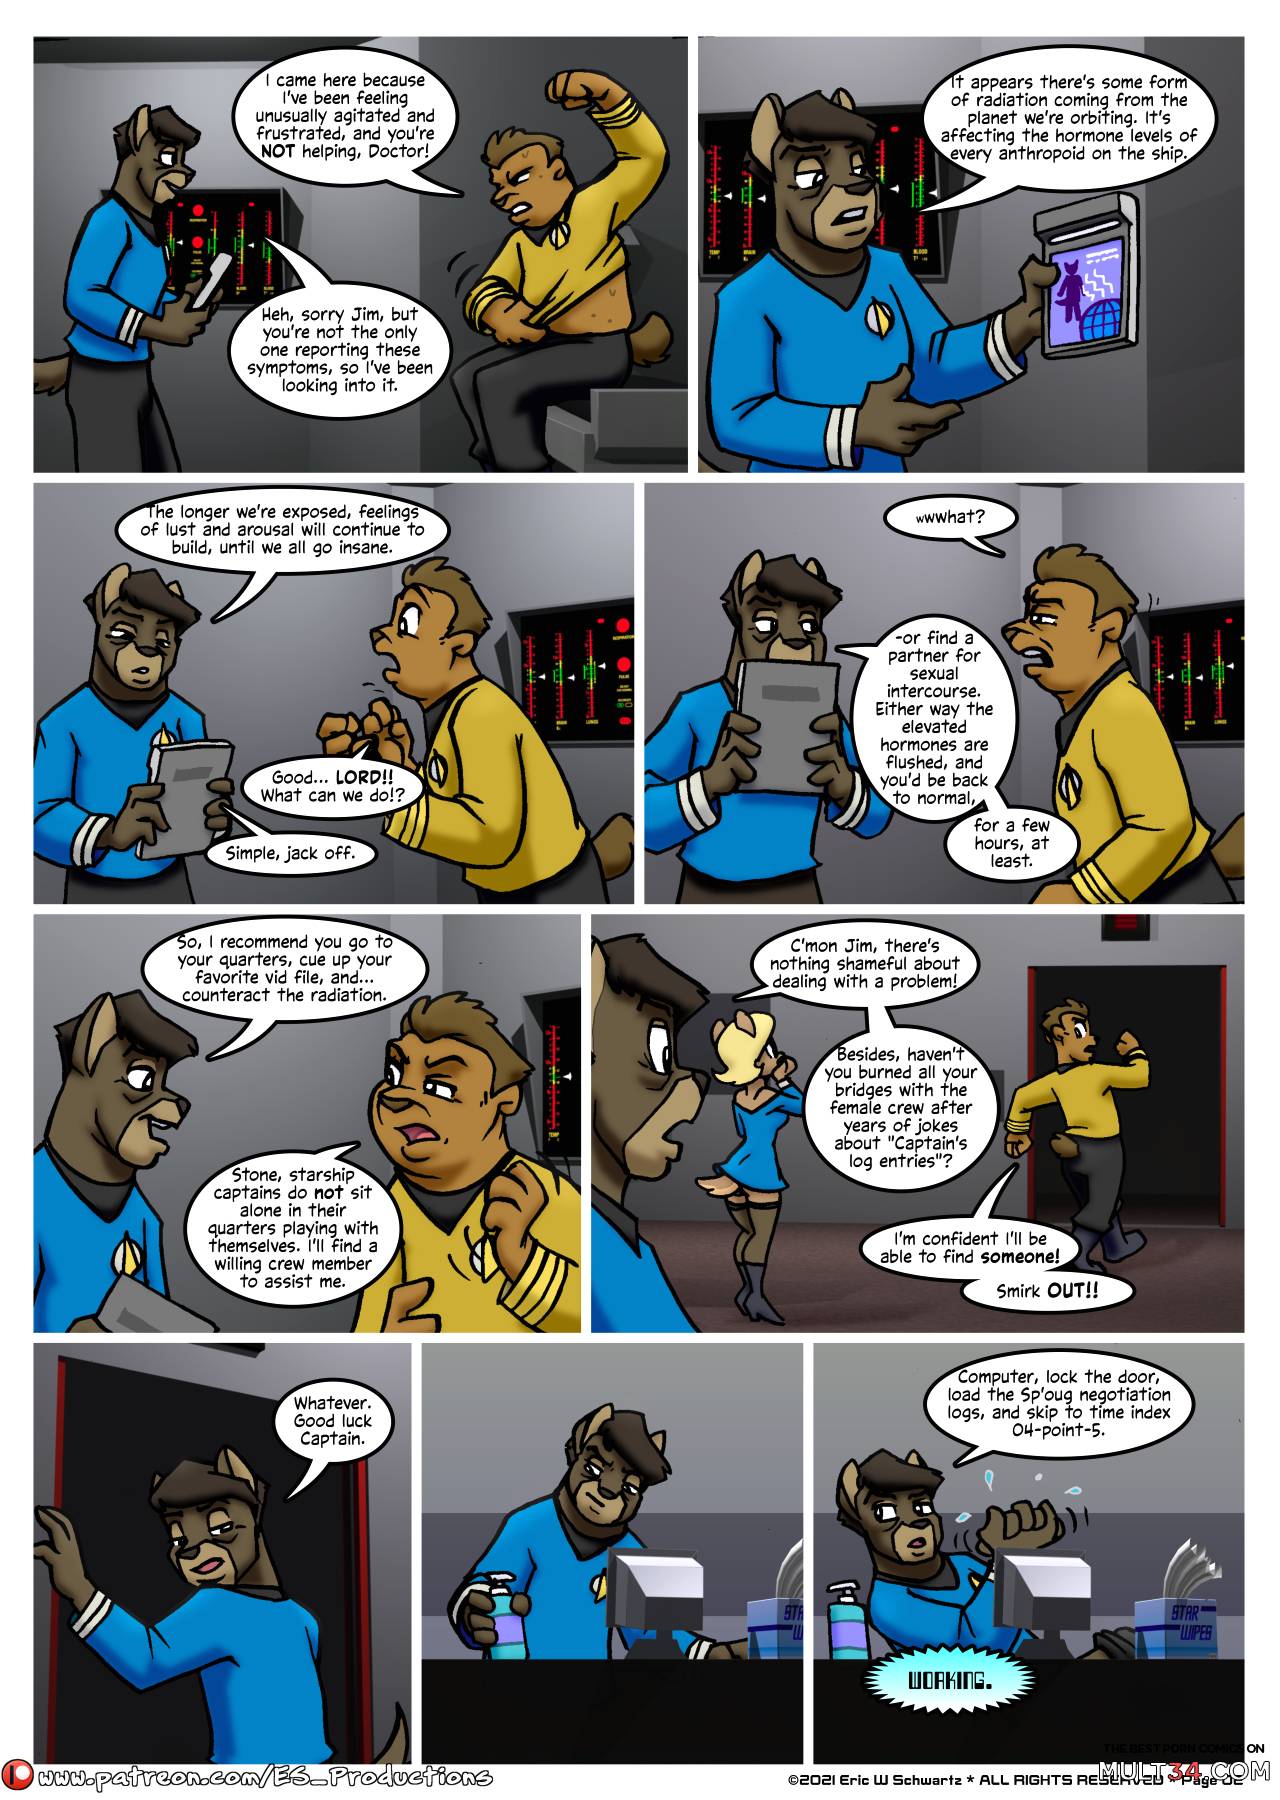 Stellar Voyages: The naked never page 3